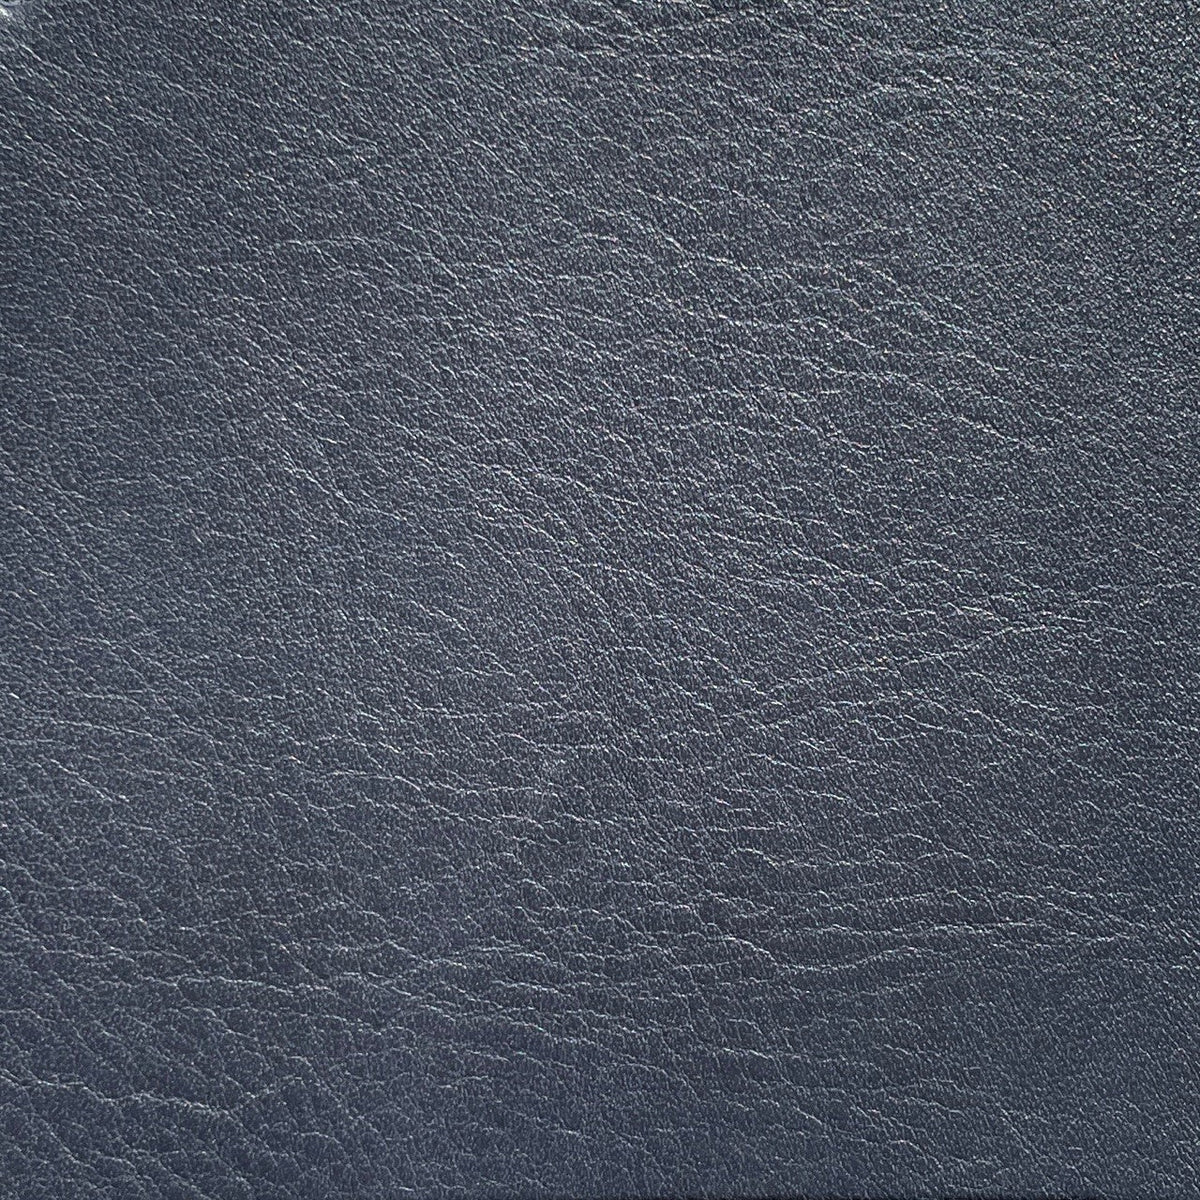 Olympia Cow Half Side | Navy | 1.5 mm | 10.5 sq.ft | From $160 ea.